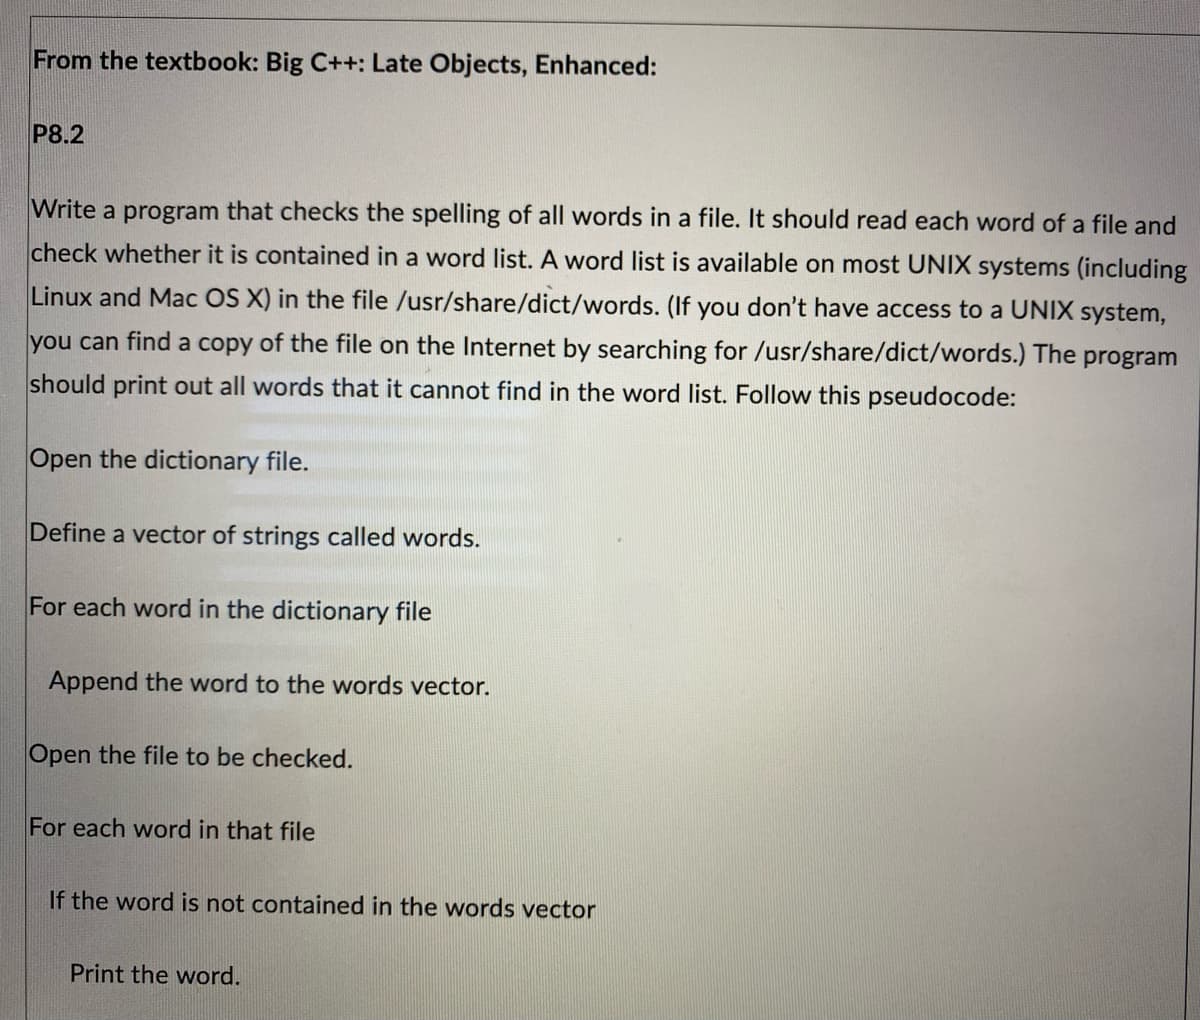 From the textbook: Big C++: Late Objects, Enhanced:
P8.2
Write a program that checks the spelling of all words in a file. It should read each word of a file and
check whether it is contained in a word list. A word list is available on most UNIX systems (including
Linux and Mac OS X) in the file /usr/share/dict/words. (If you don't have access to a UNIX system,
you can find a copy of the file on the Internet by searching for /usr/share/dict/words.) The program
should print out all words that it cannot find in the word list. Follow this pseudocode:
Open the dictionary file.
Define a vector of strings called words.
For each word in the dictionary file
Append the word to the words vector.
Open the file to be checked.
For each word in that file
If the word is not contained in the words vector
Print the word.